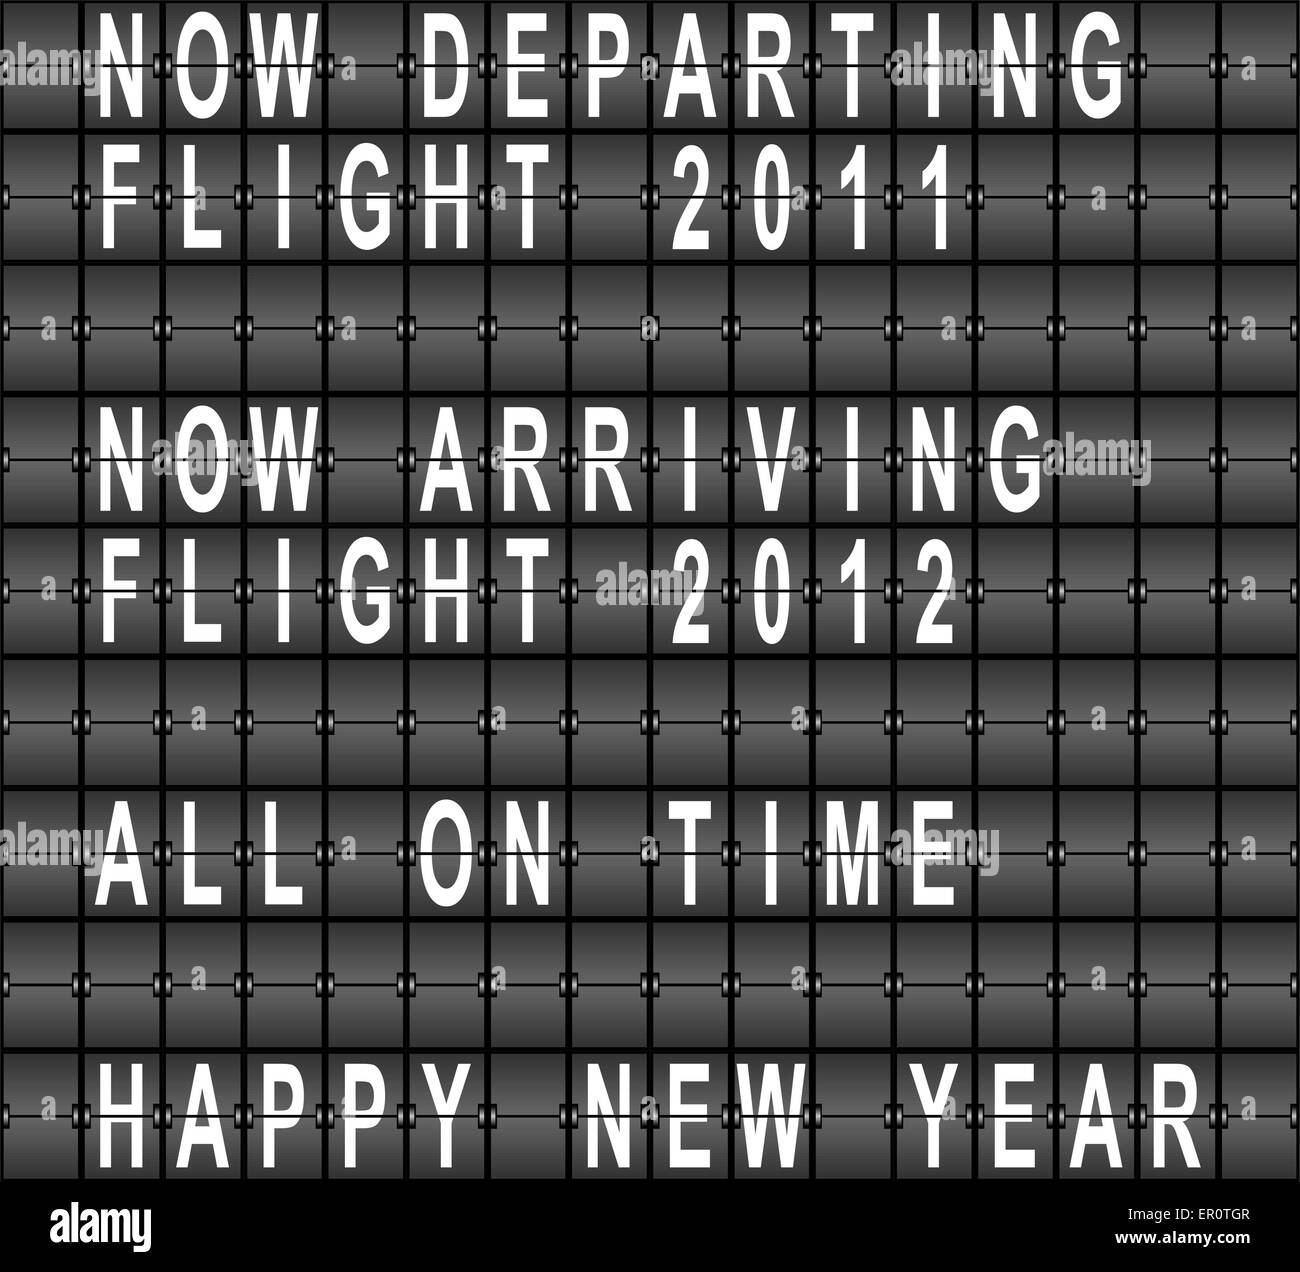 Happy New Year Airport Terminal Background Stock Vector